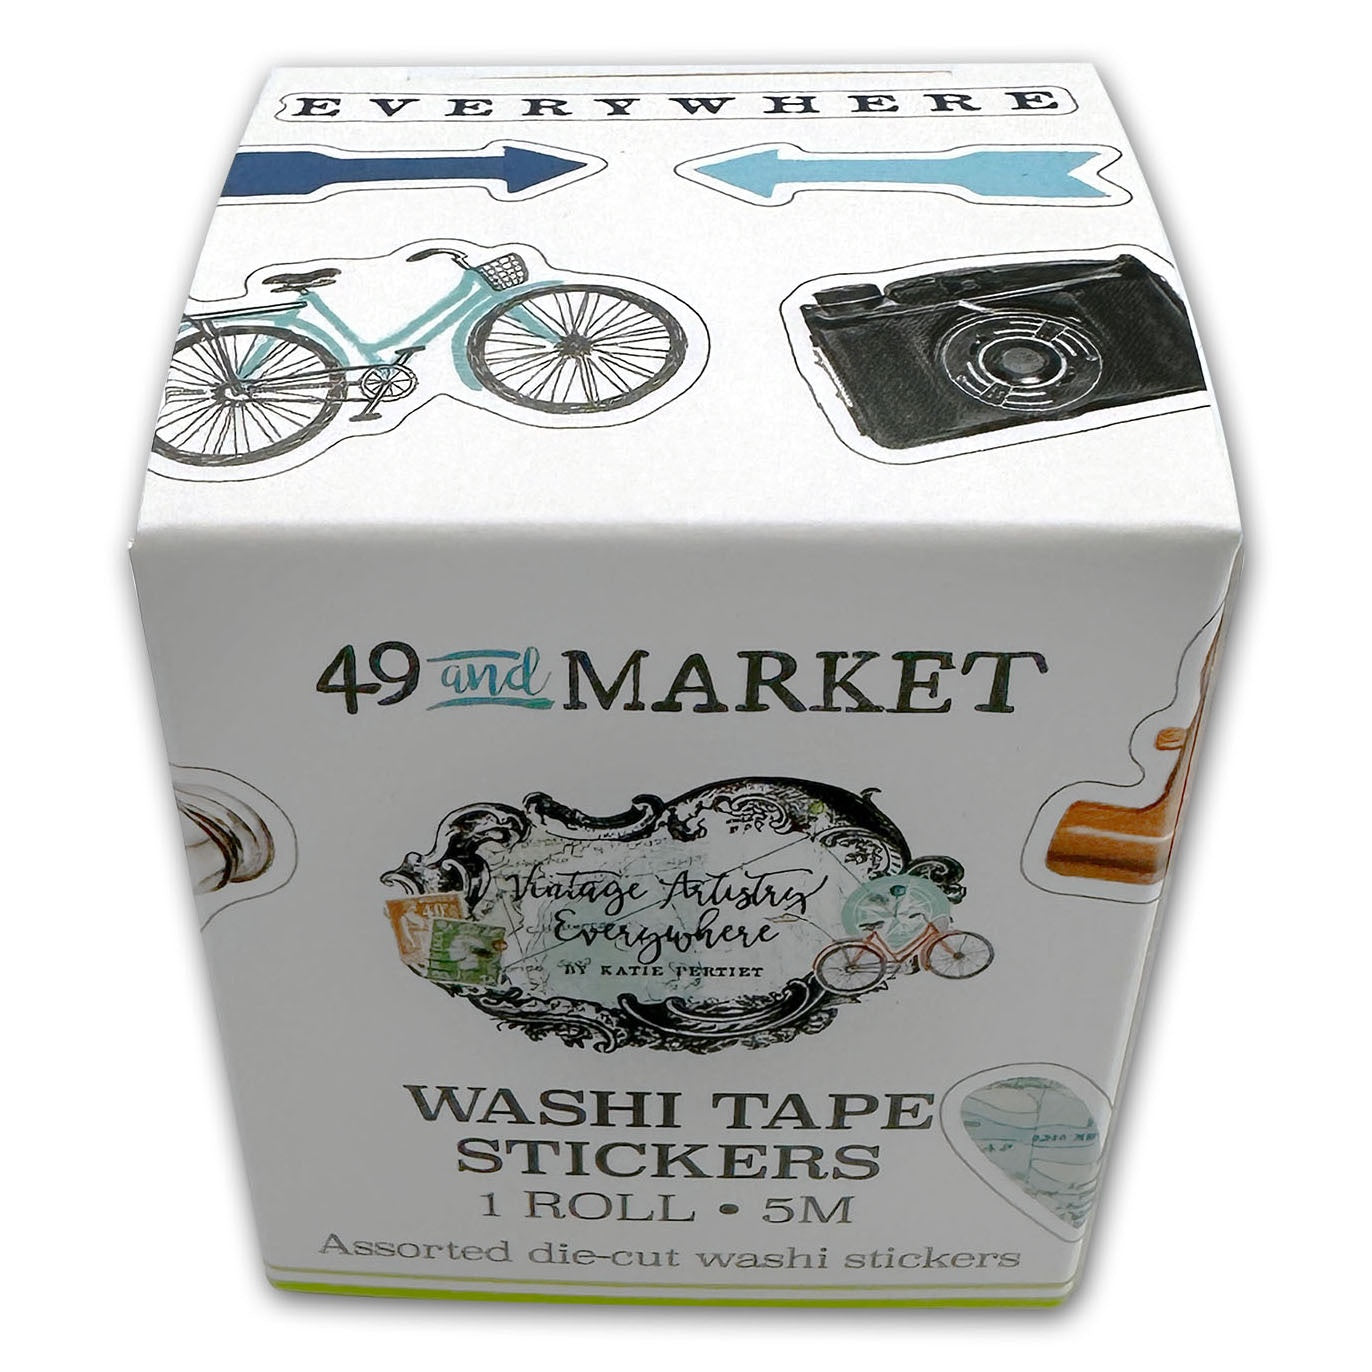 Washi Tape Stickers - Vintage Artistry Everywhere - 49 and Market